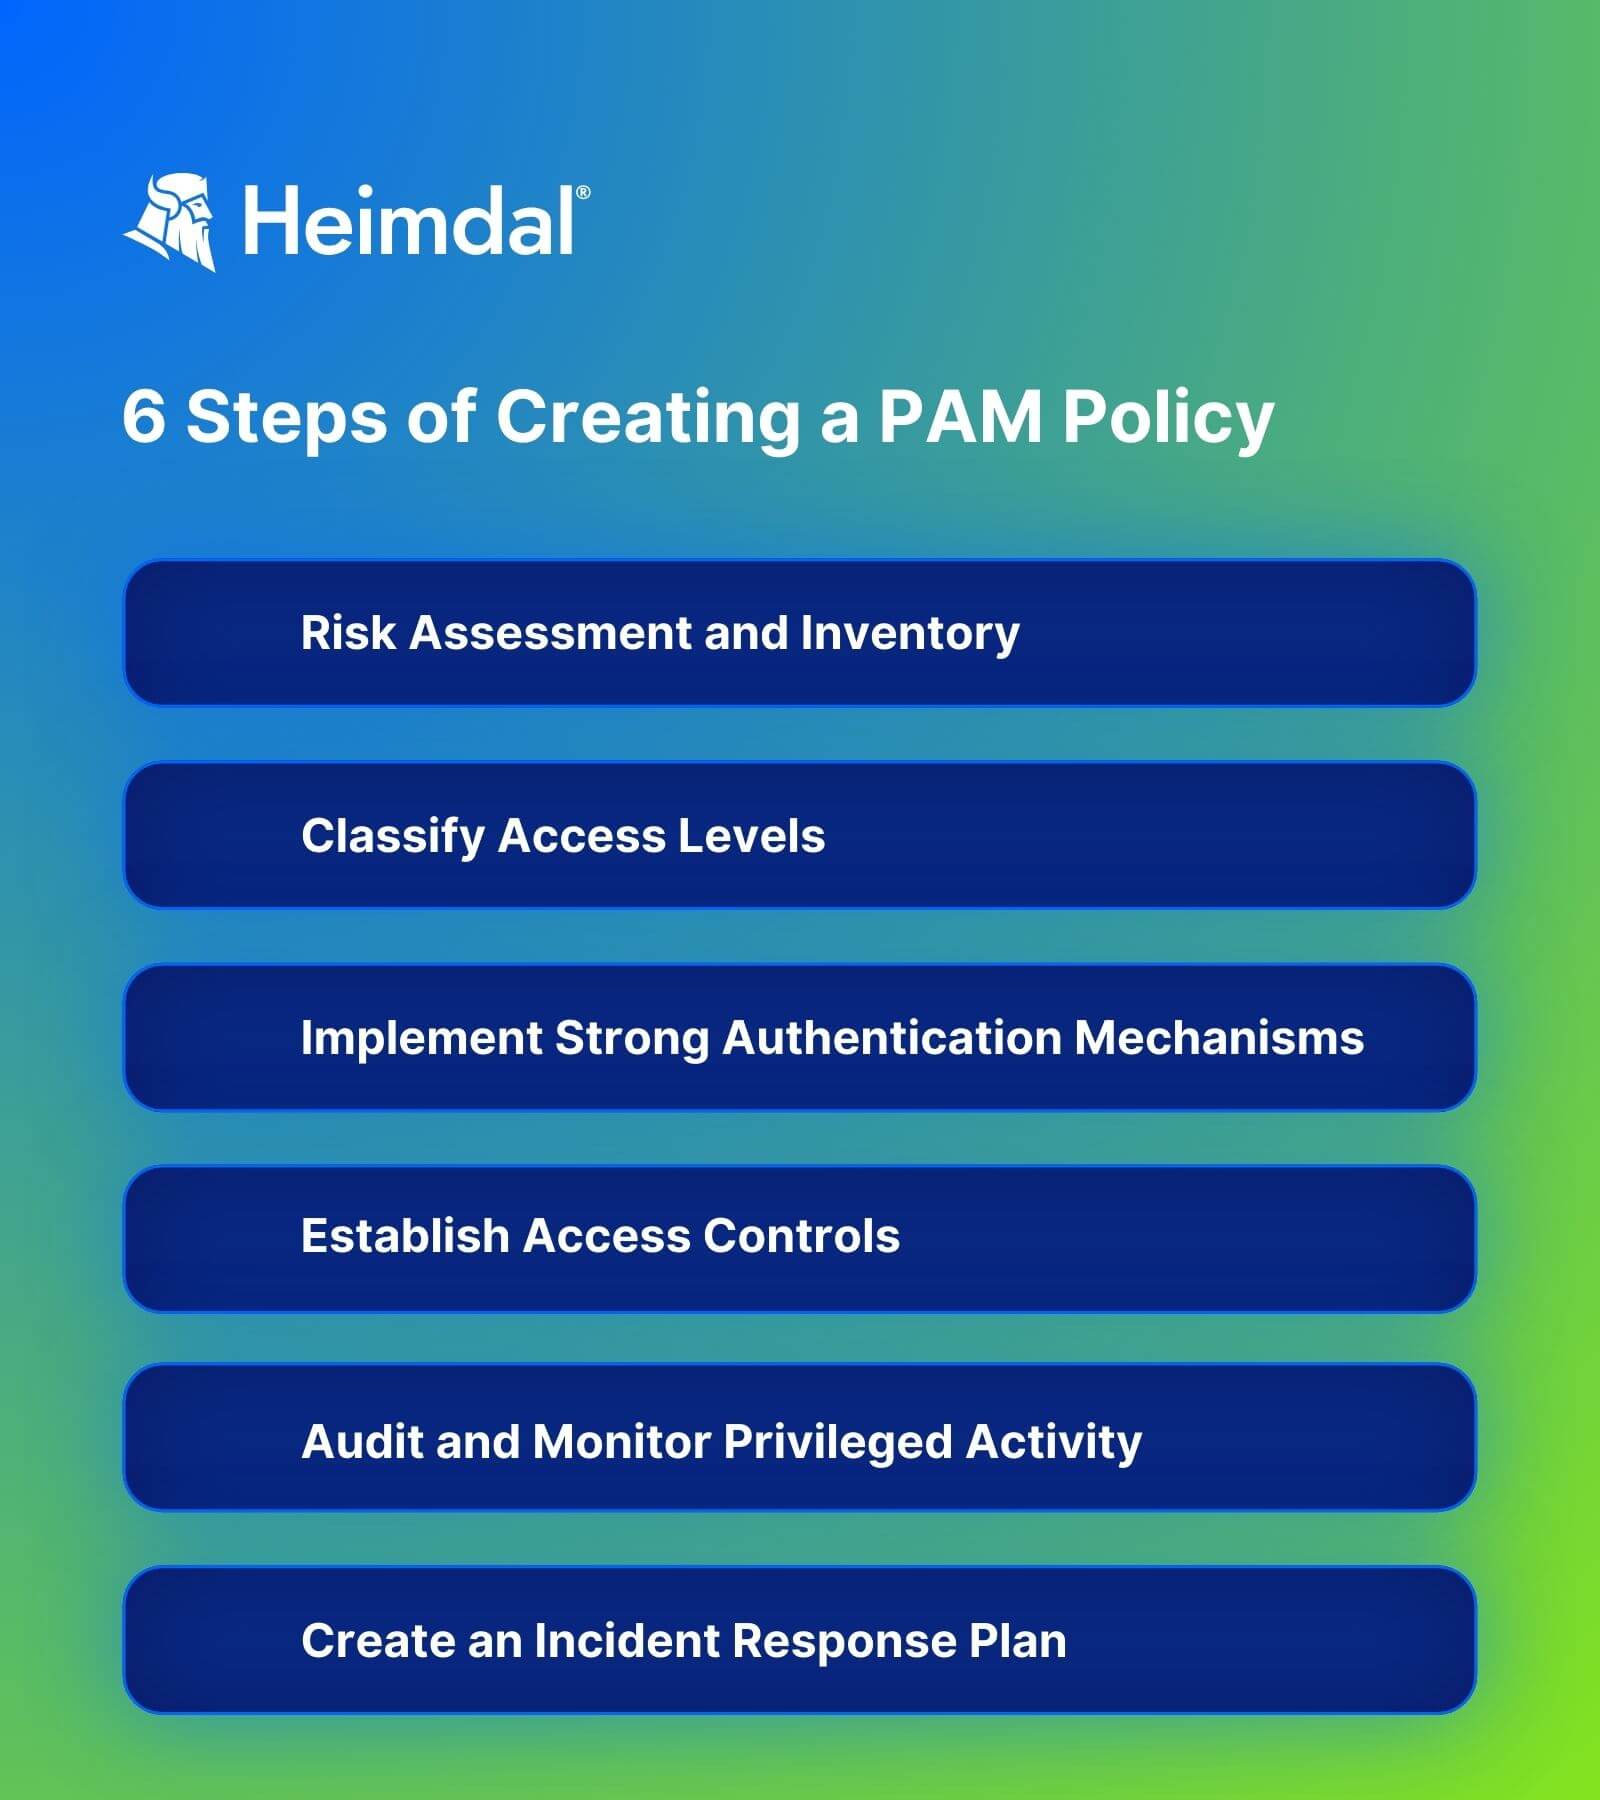 6 steps of creating a PAM Policy